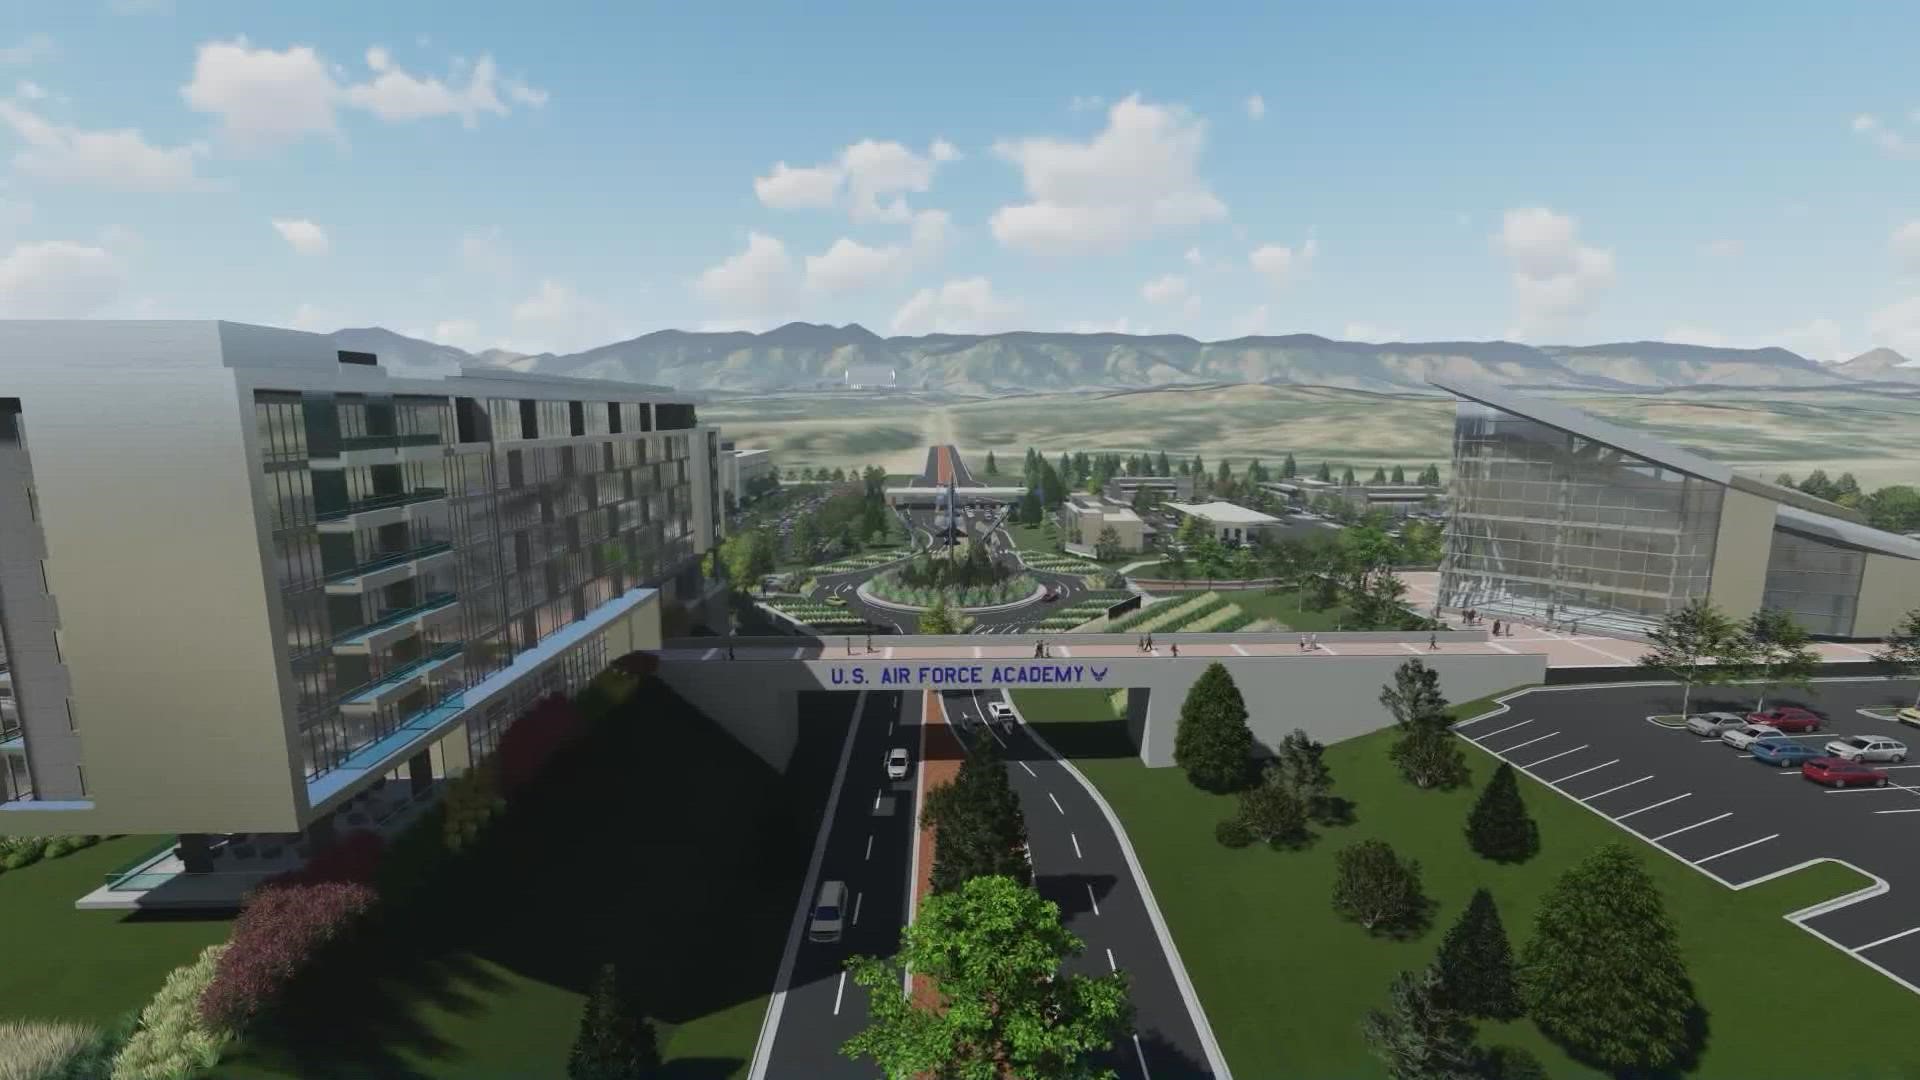 A new visitor center, hotel and conference center are coming to the United States Air Force Academy.